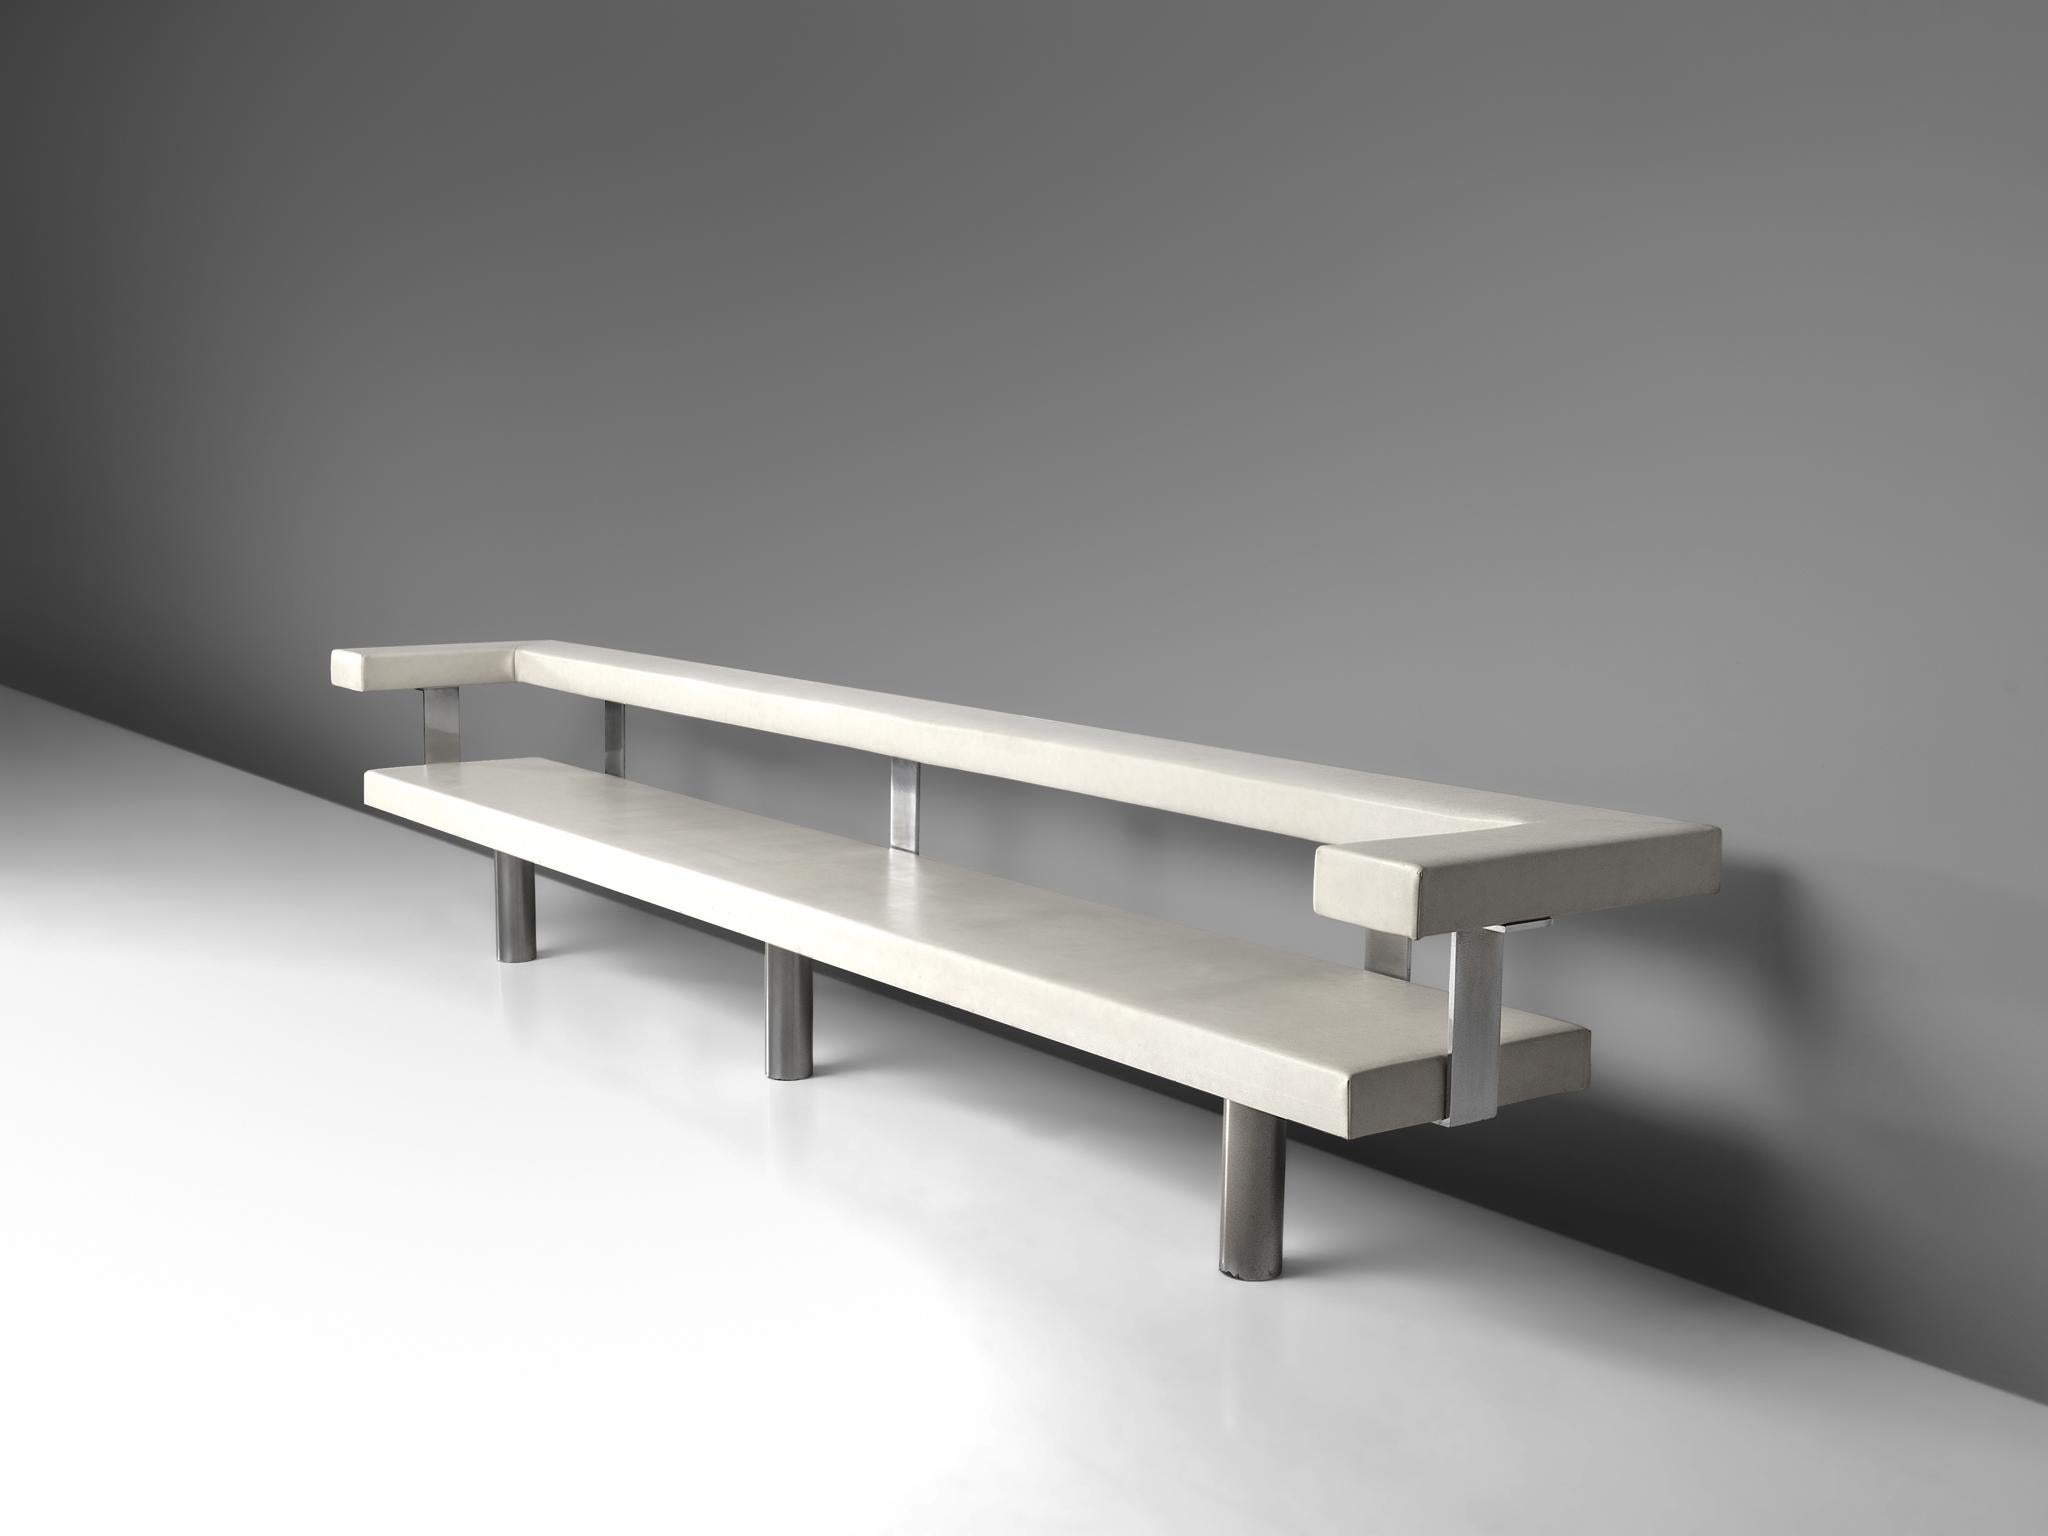 Gerrit Rietveld and interior designer J. Tricht, bench, white faux-leather and metal The Netherlands, 1965.

This bench was originally designed as a 'hall bench' for a local bank in Dedemsvaart, The Netherlands. J. Tricht was the interior decorator